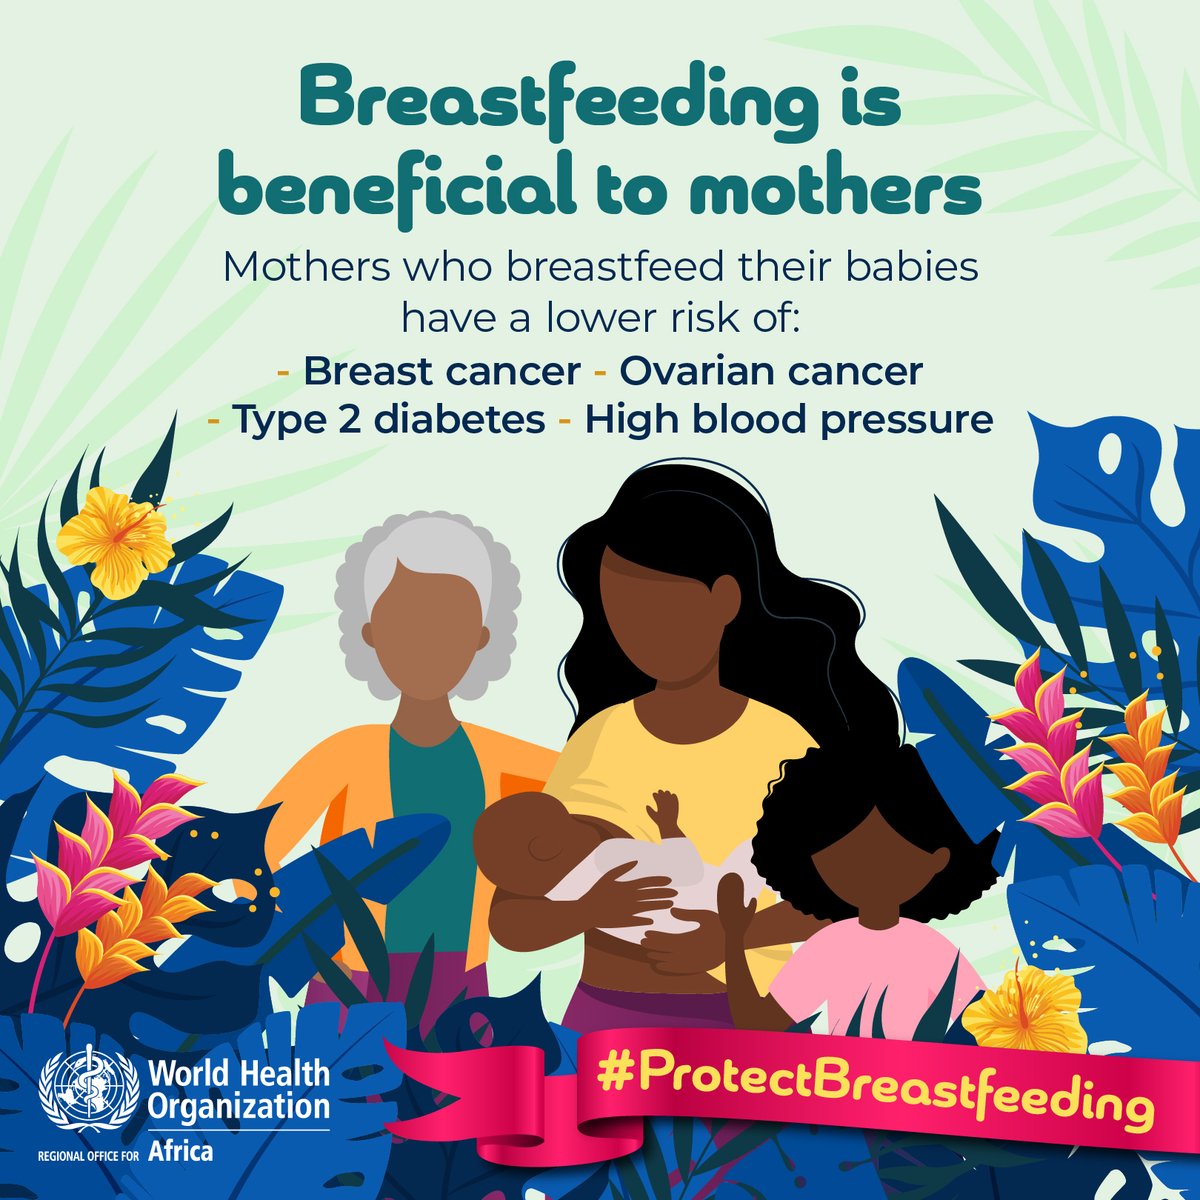 Did you know that breastfeeding has important positive long-term impacts on the health of infants and mothers?  Breastfeeding 🤱🏿 reduces risk of diseases such as cancer in mothers.

#ProtectBreastfeeding